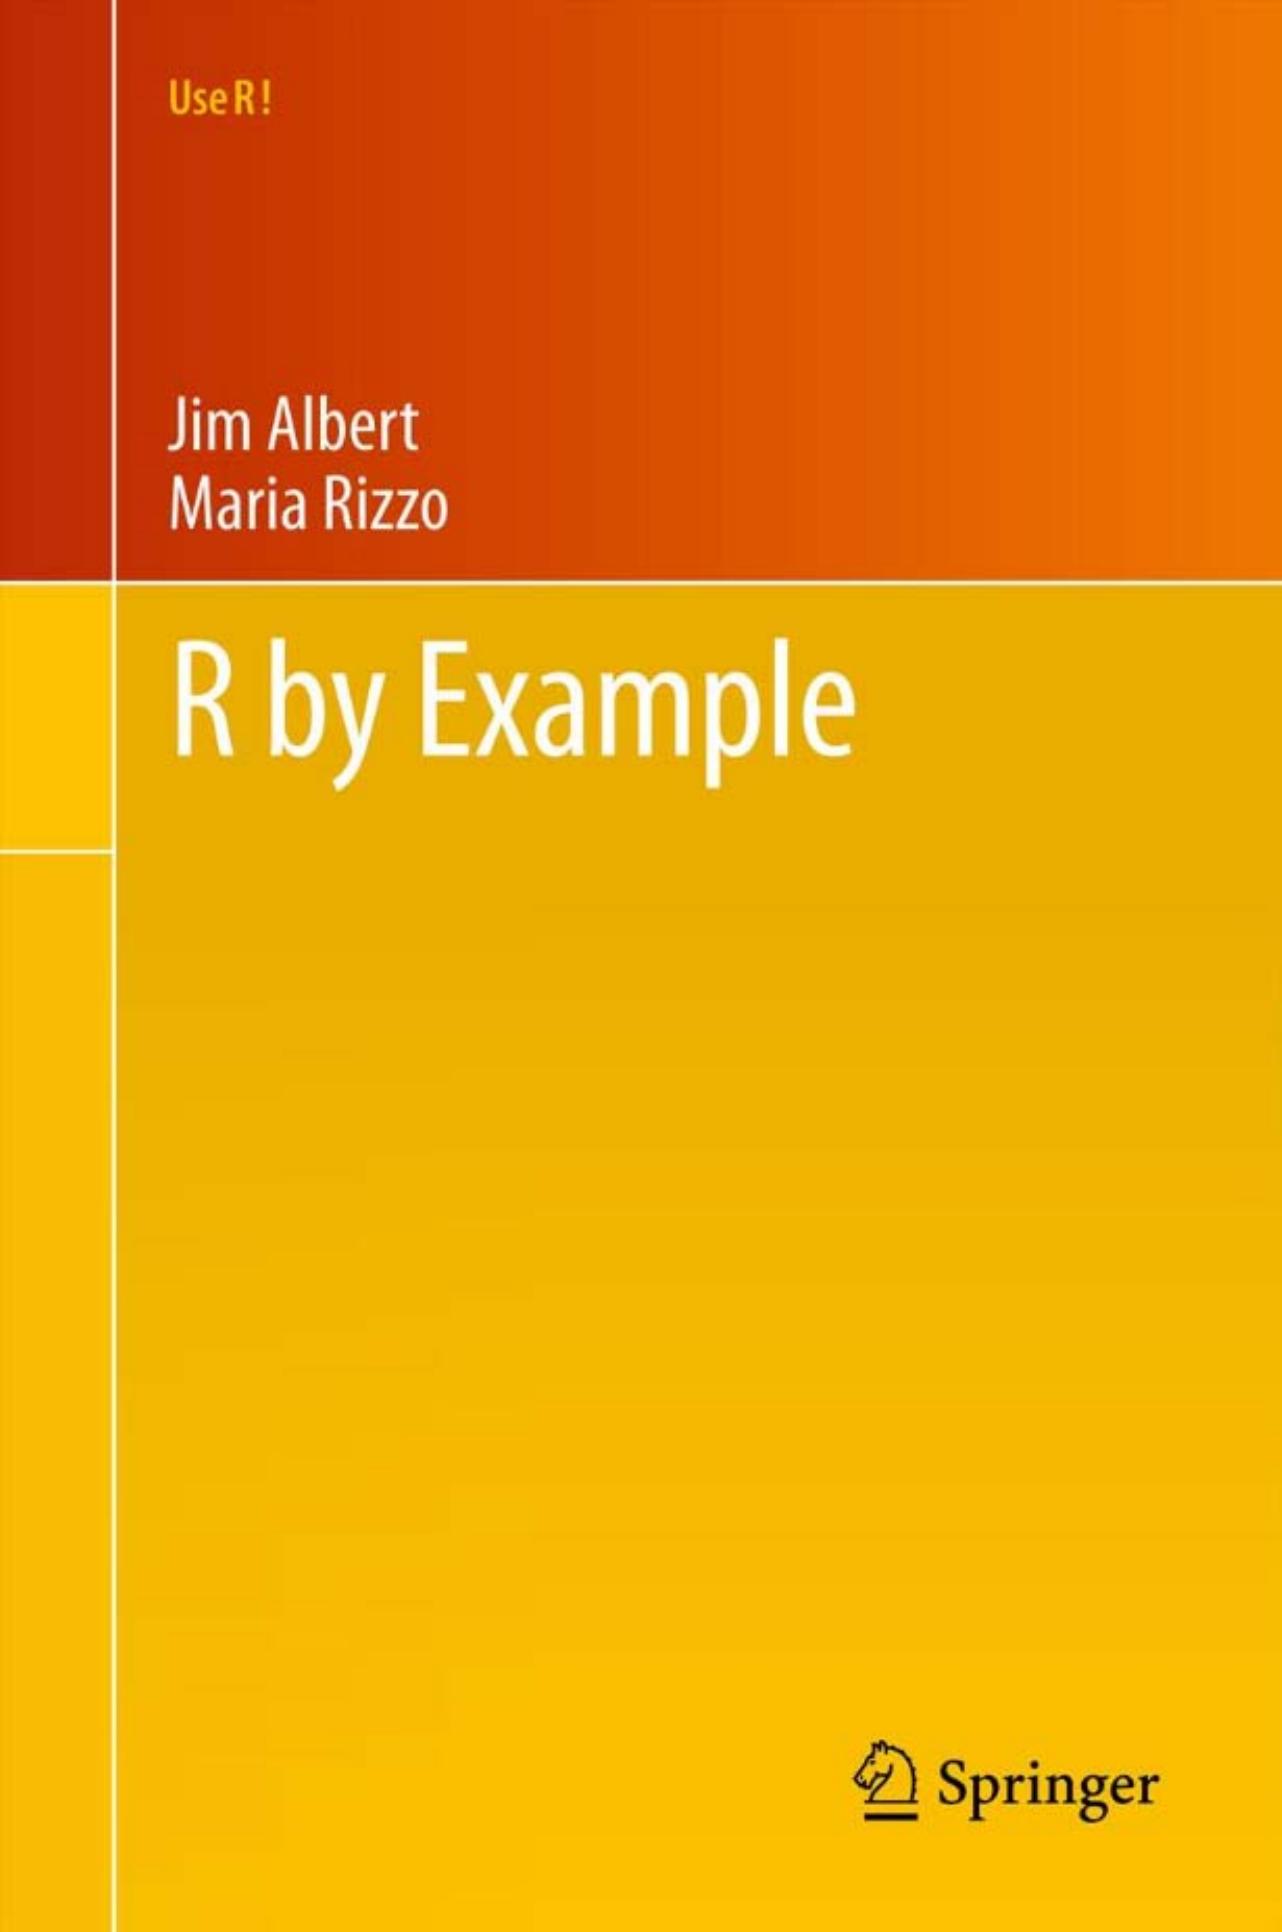 R by Example (Use R!)